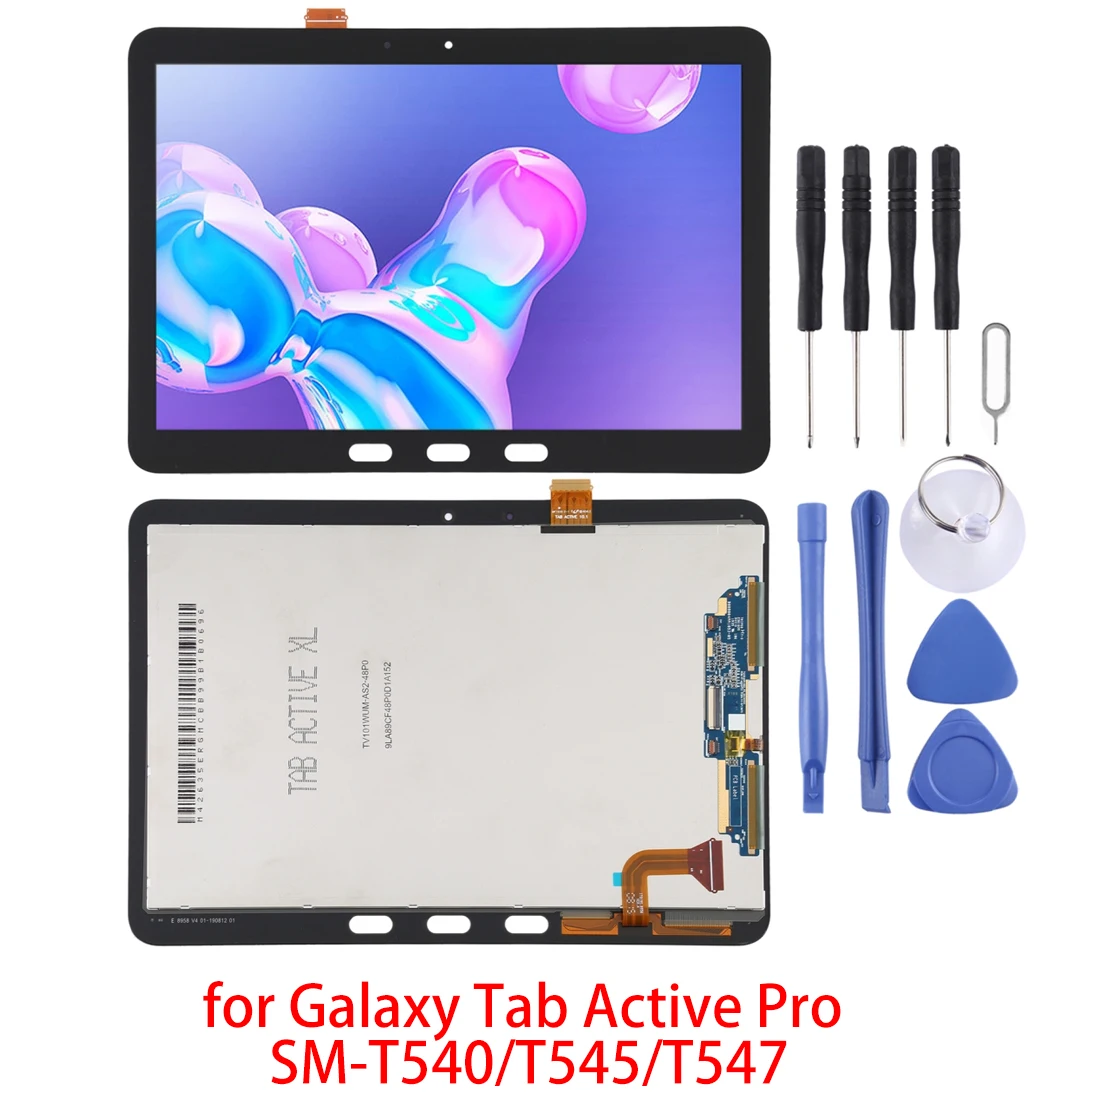 New For Galaxy Tab Active Pro LCD Screen&Digitizer Full Assembly for Samsung Galaxy Tab Active Pro SM-T540/T545/T547